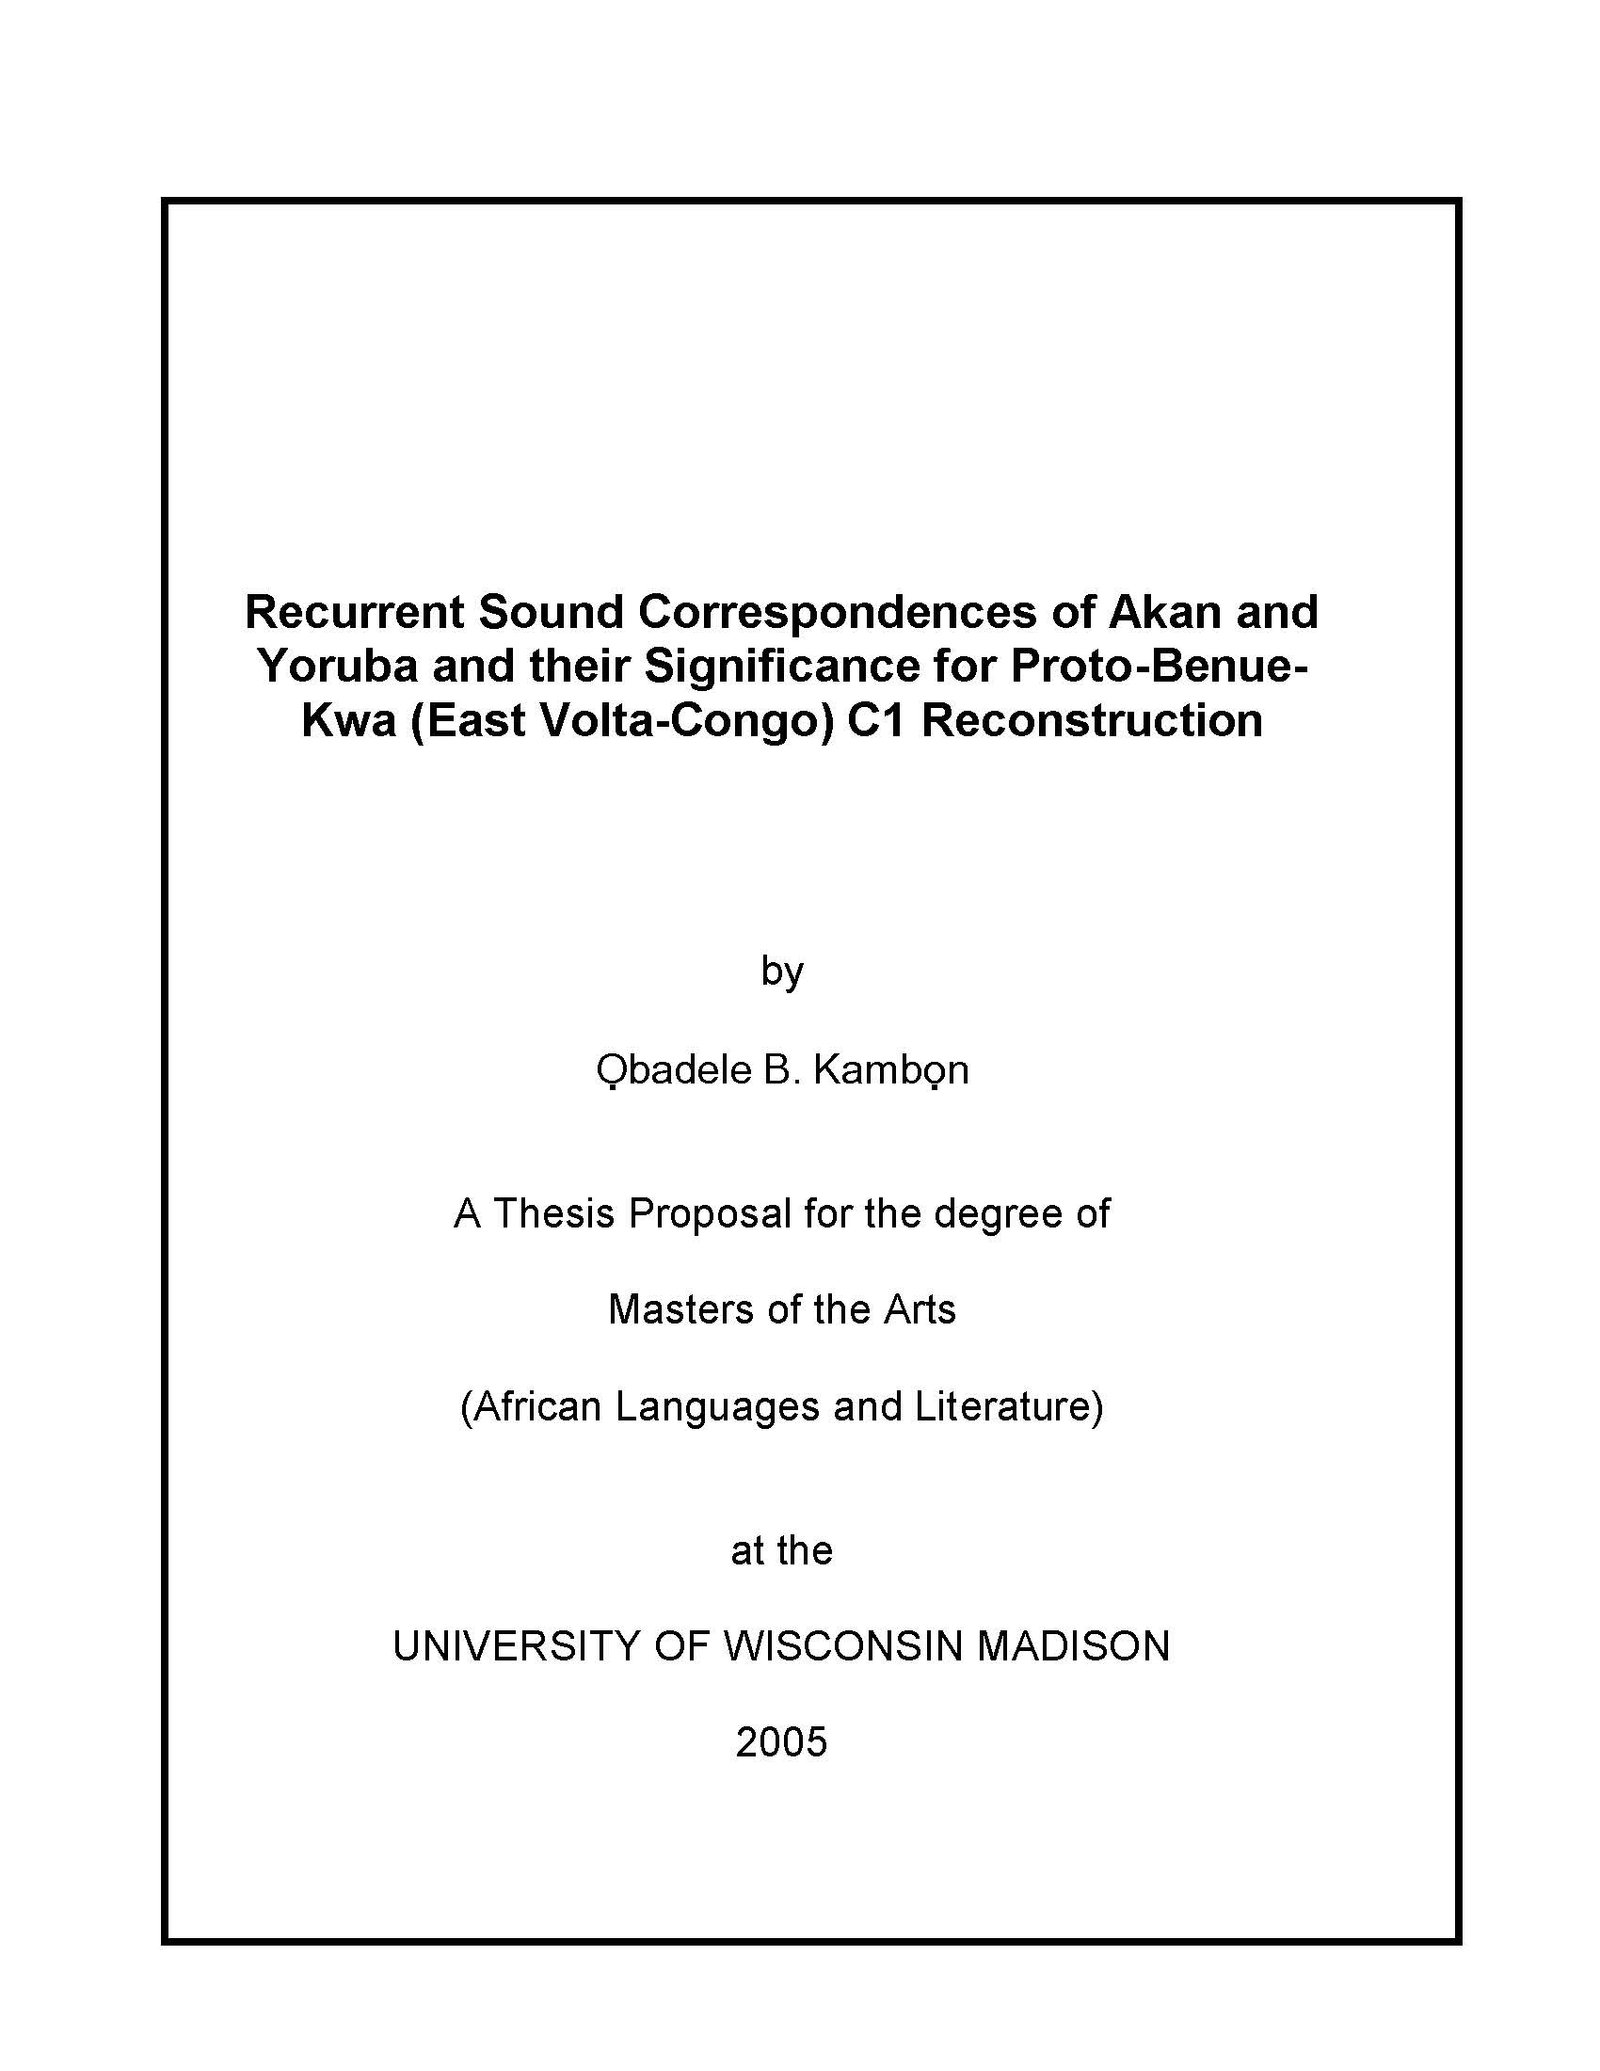 Recurrent Sound Correspondences of Akan and Yoruba and their Significance for Proto-Benue-Kwa (East Volta-Congo) C1 Reconstruction